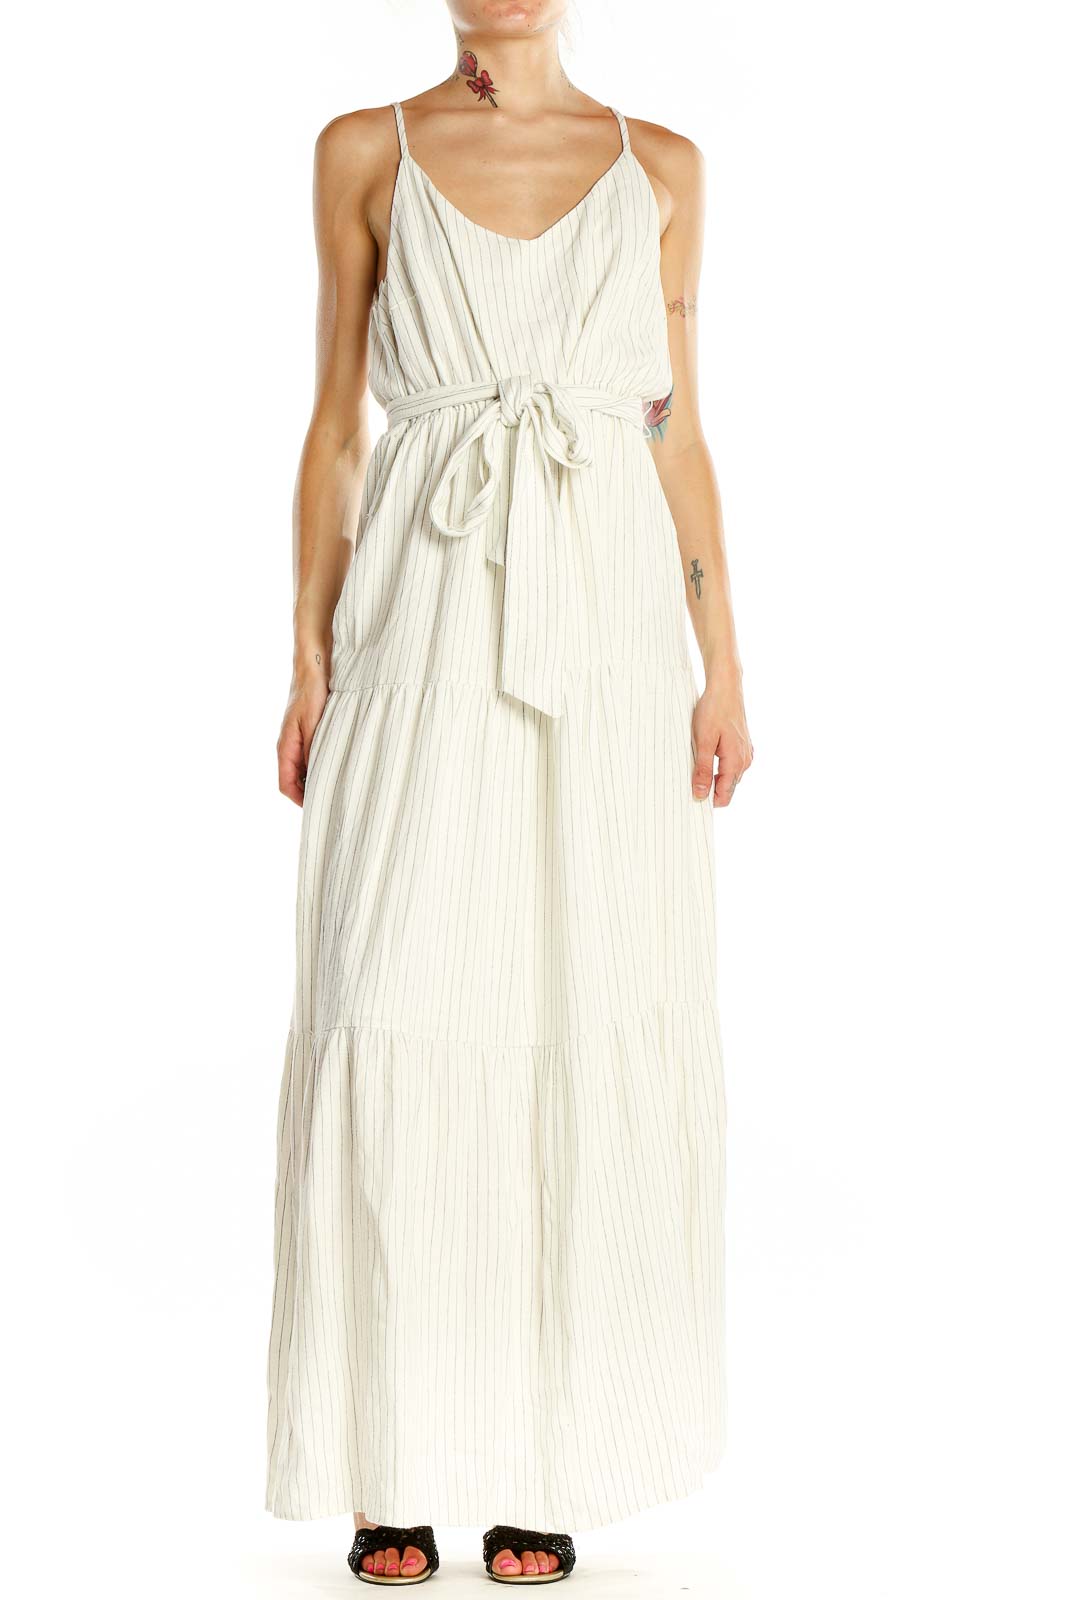 White Pinstripe Fit & Flare Dress Front